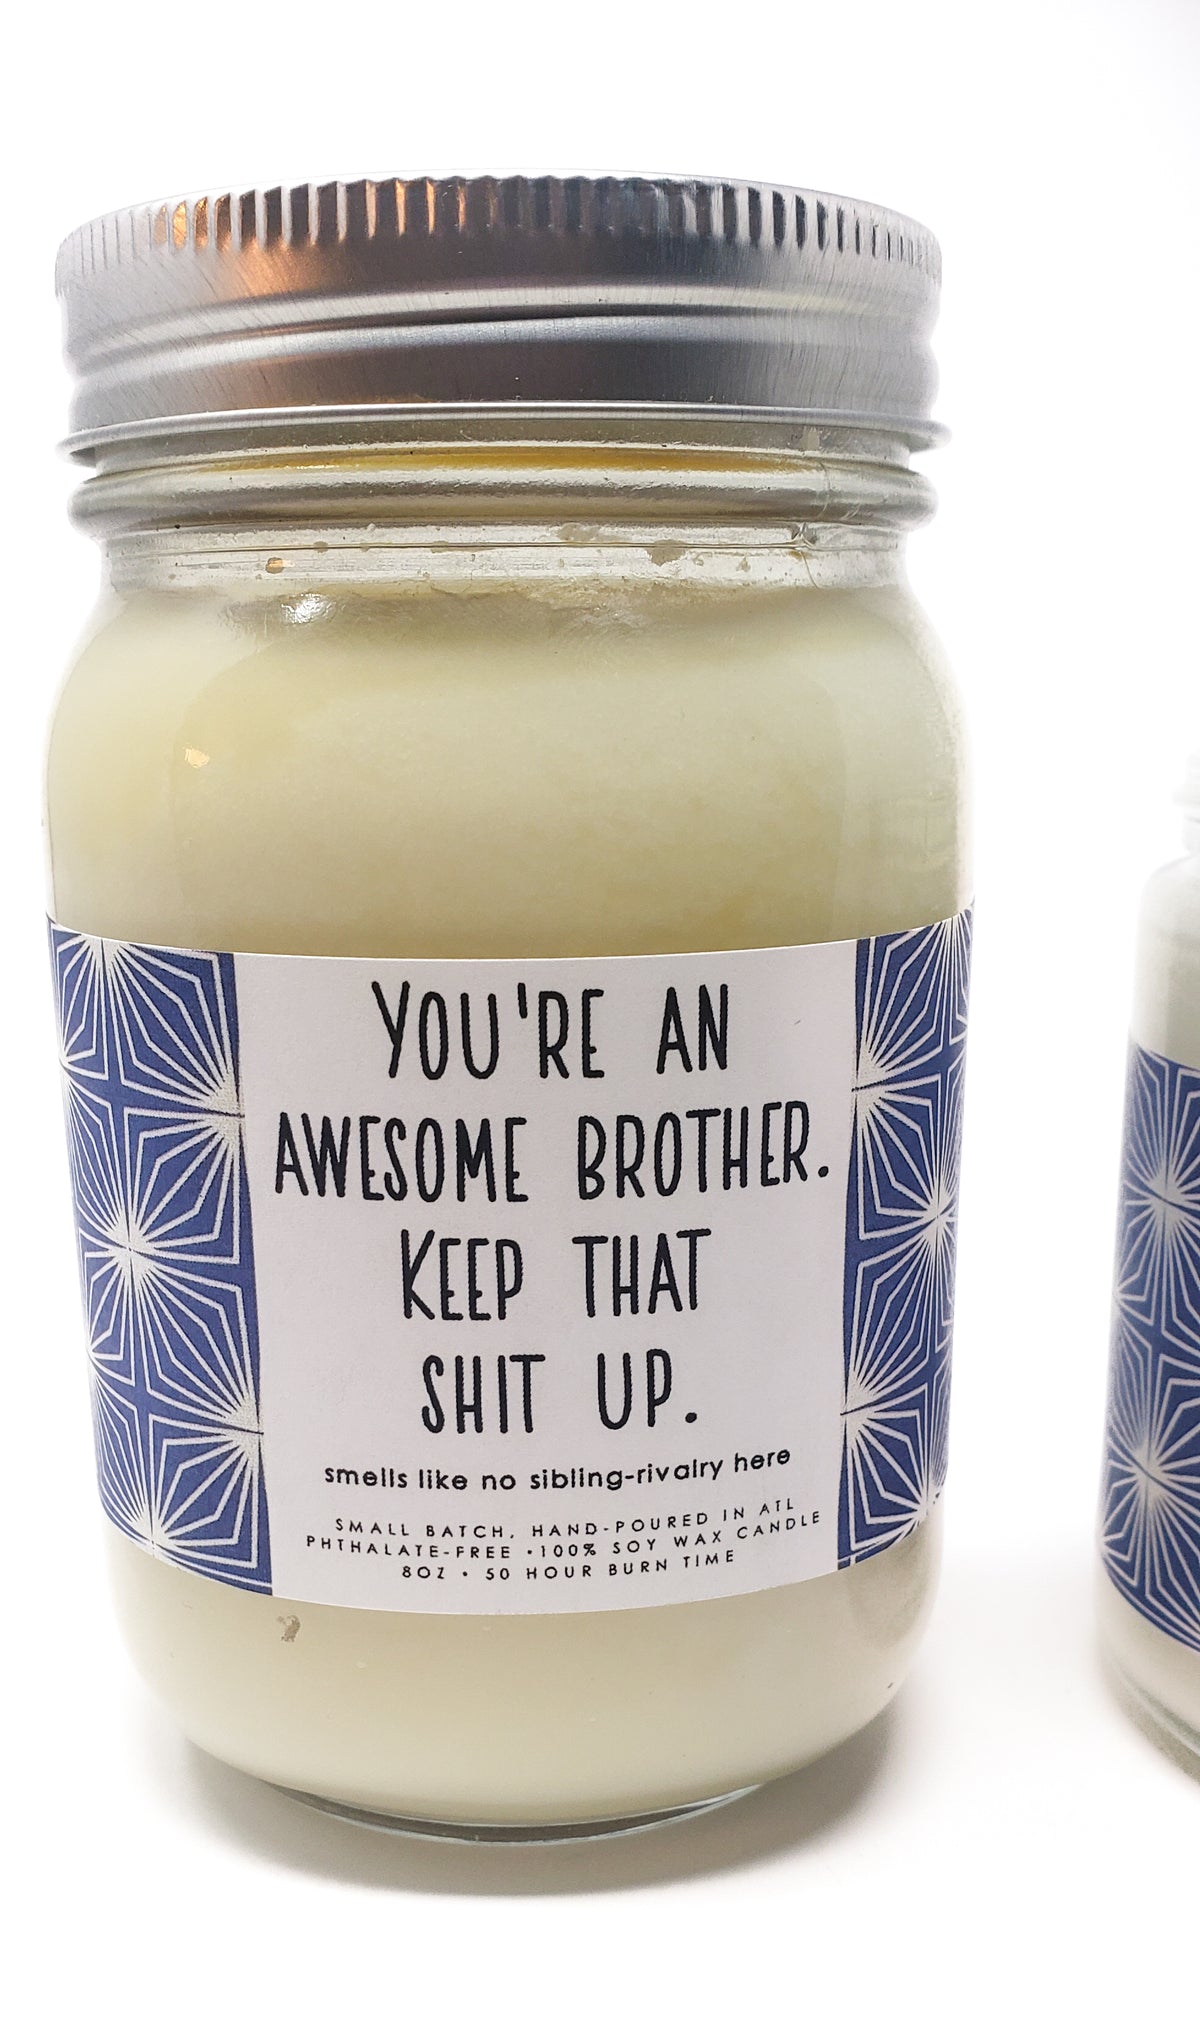 Candle - You're an Awesome Brother. Keep that Shit Up.